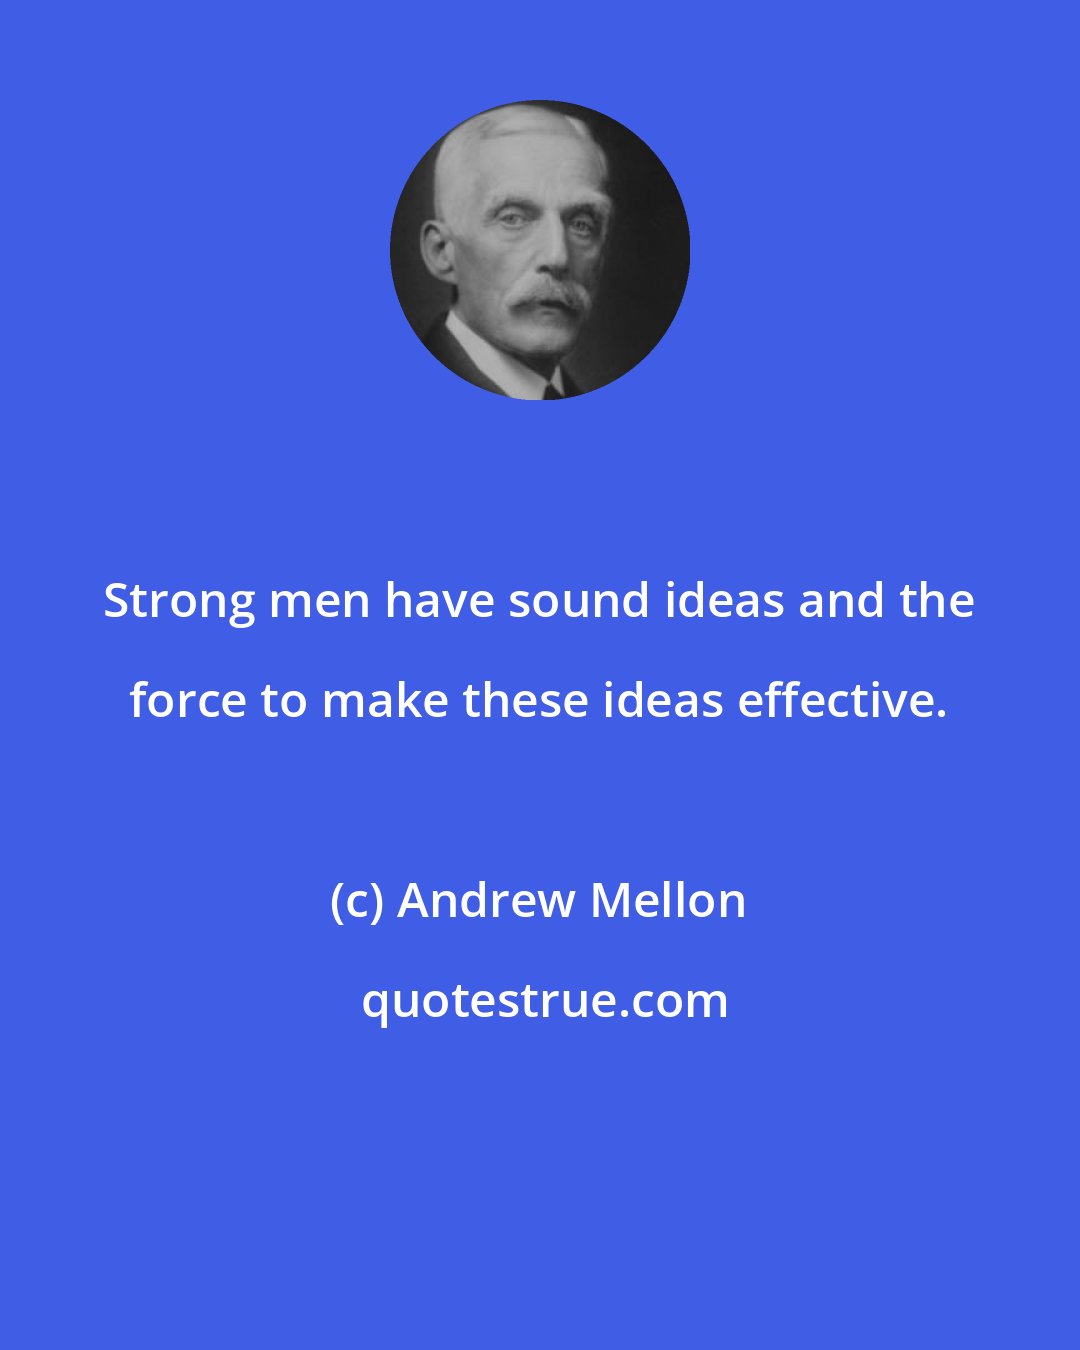 Andrew Mellon: Strong men have sound ideas and the force to make these ideas effective.